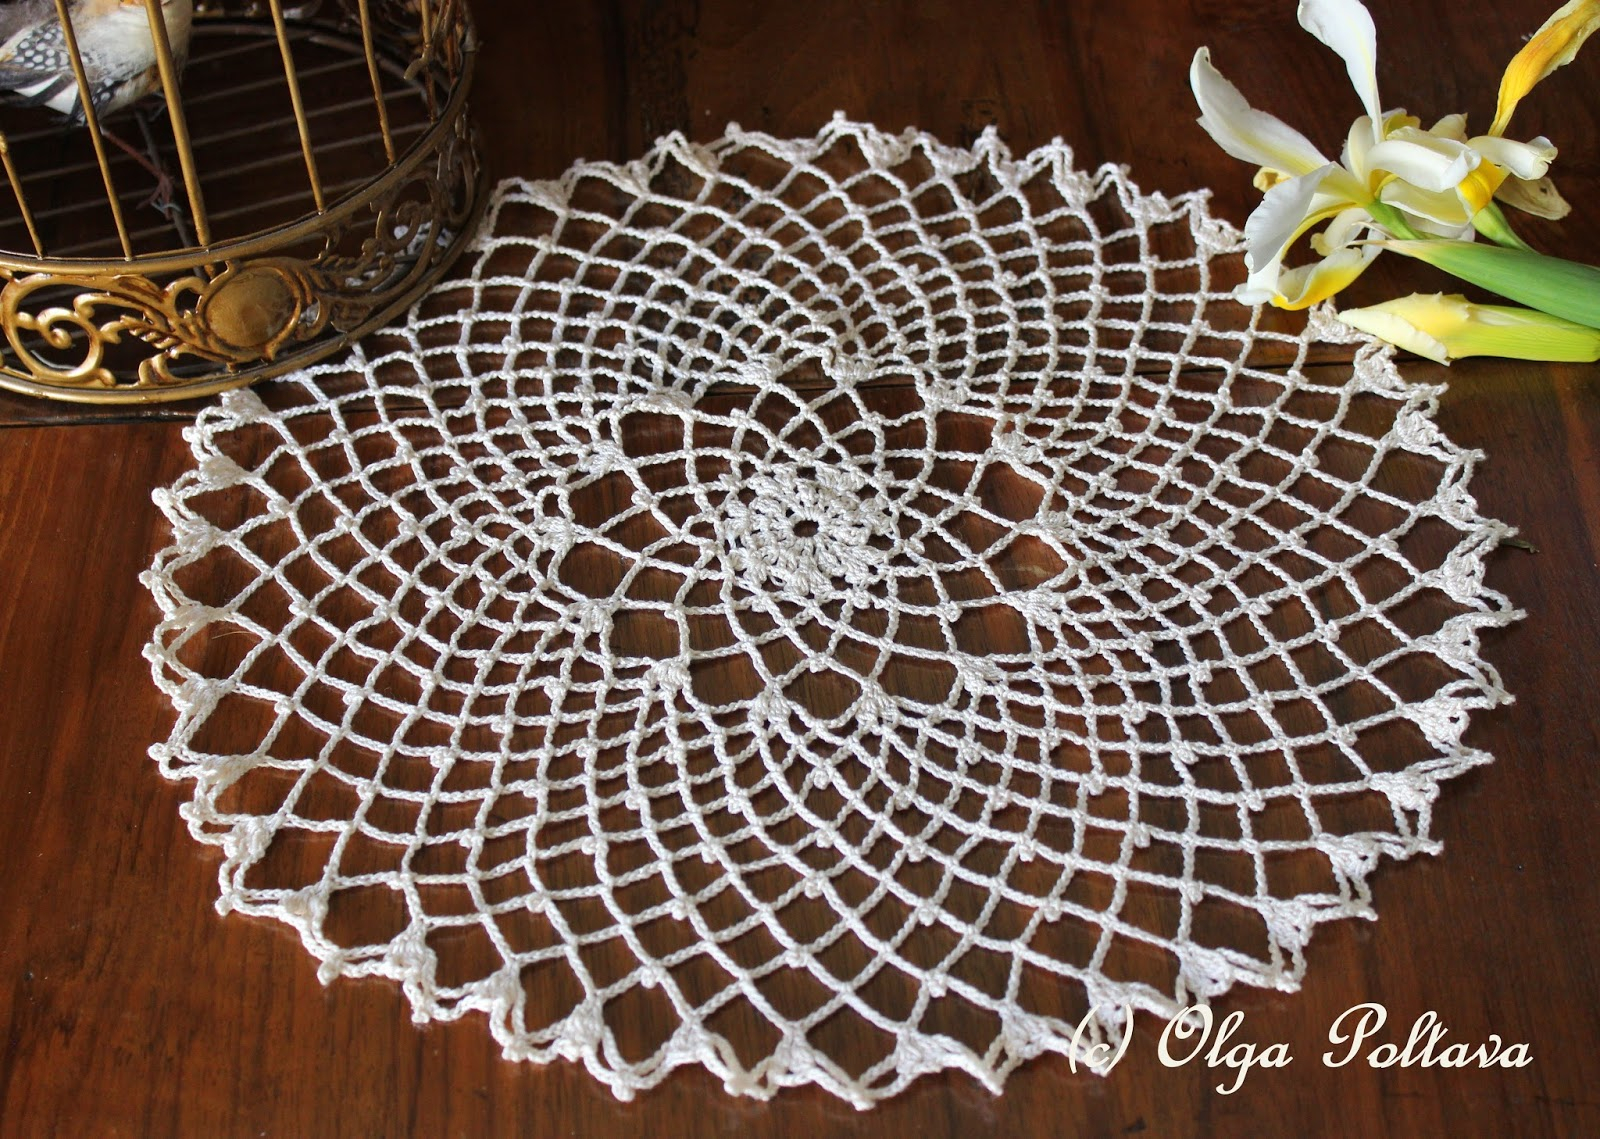 Easy Crochet Doily Patterns For Beginners Your Friendly Guide To Doily Patterns Designing Fashionarrow